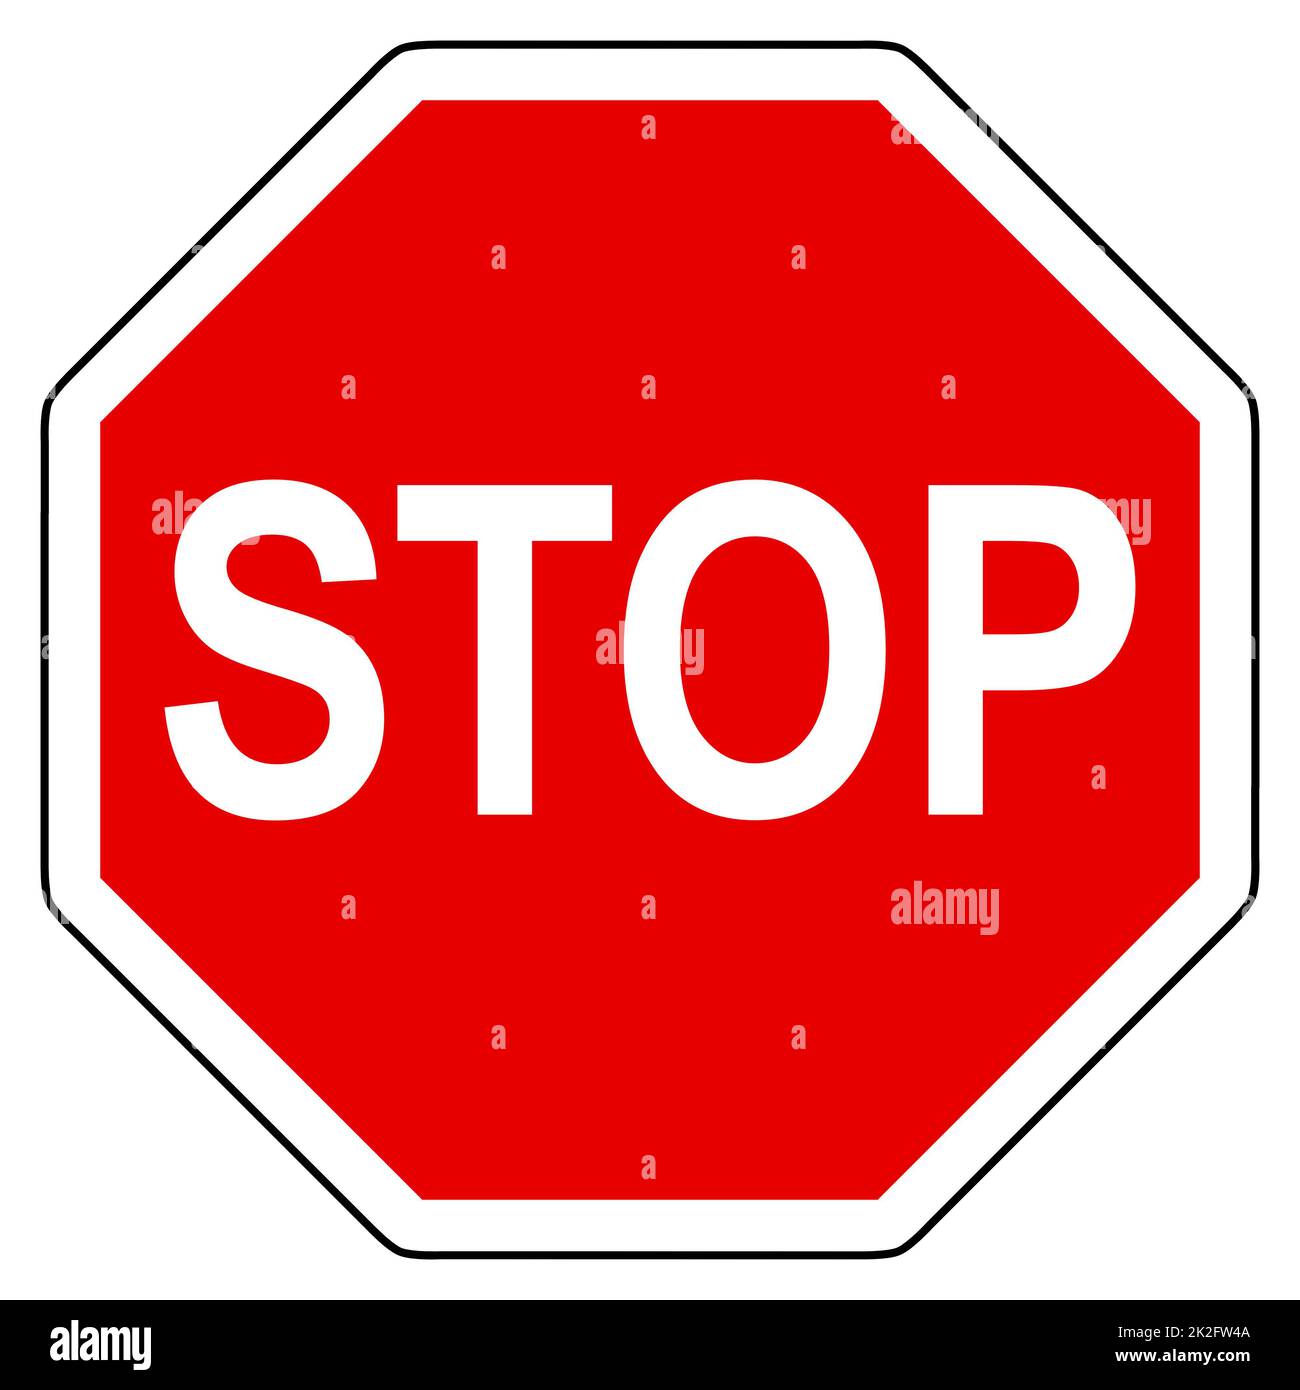 Stop and stop sign Stock Photo